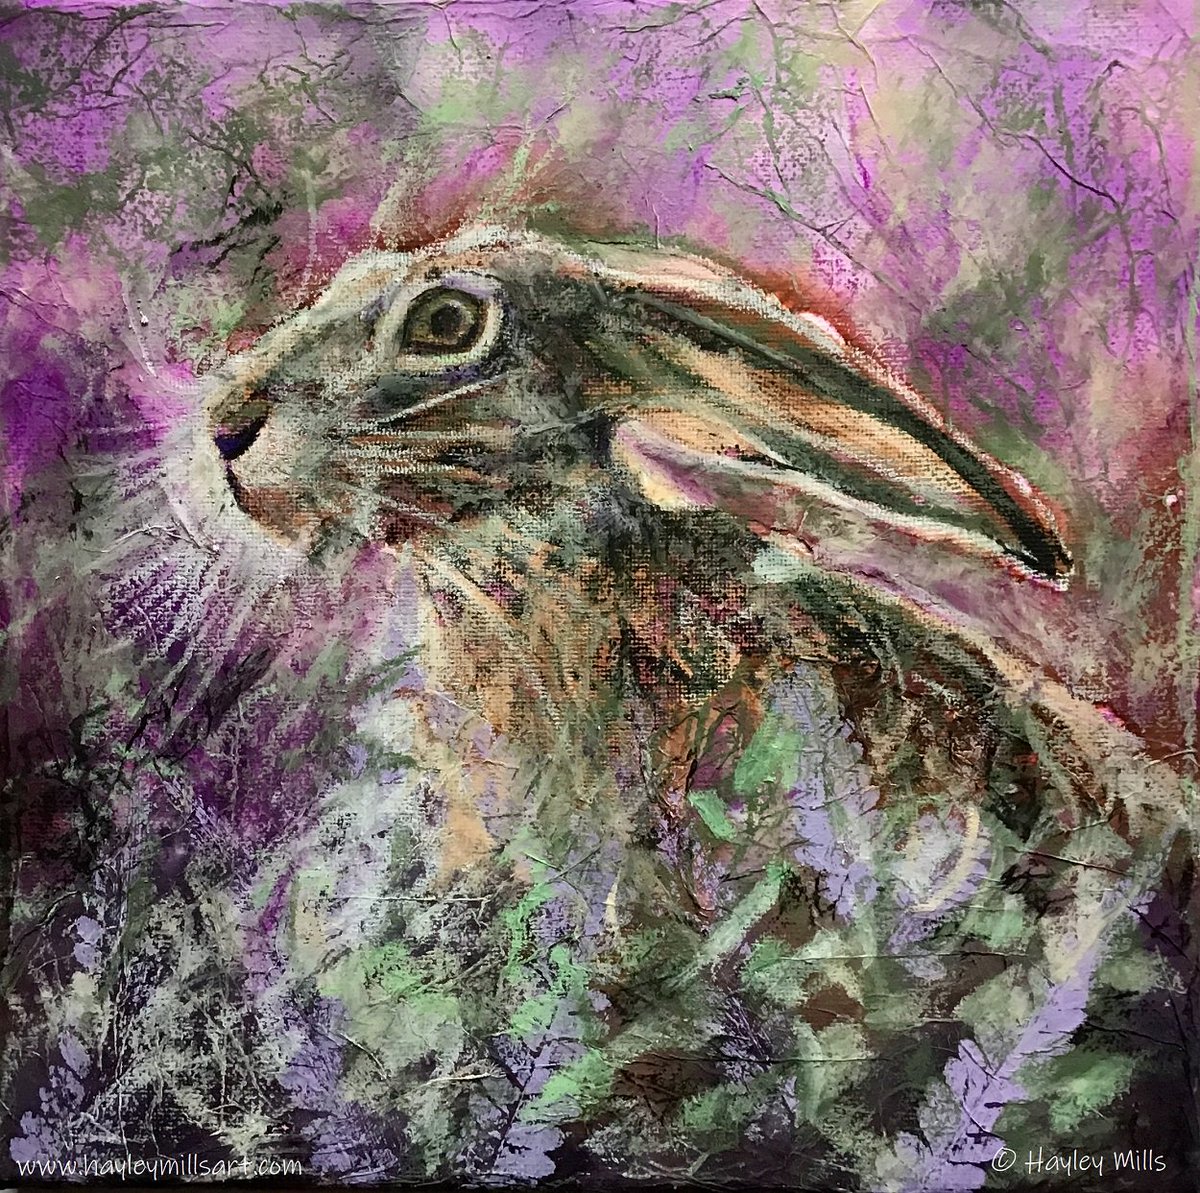 Just finished this wee #hare canvas - #mixedmedia 25x25cm unframed - had an urge & so here it is! #wildlife #wildlifeart #hares #countrylife #countryliving #scottishart #scottiahartist #animalart #nature #expressivedrawing #ontheeasel #twitterart